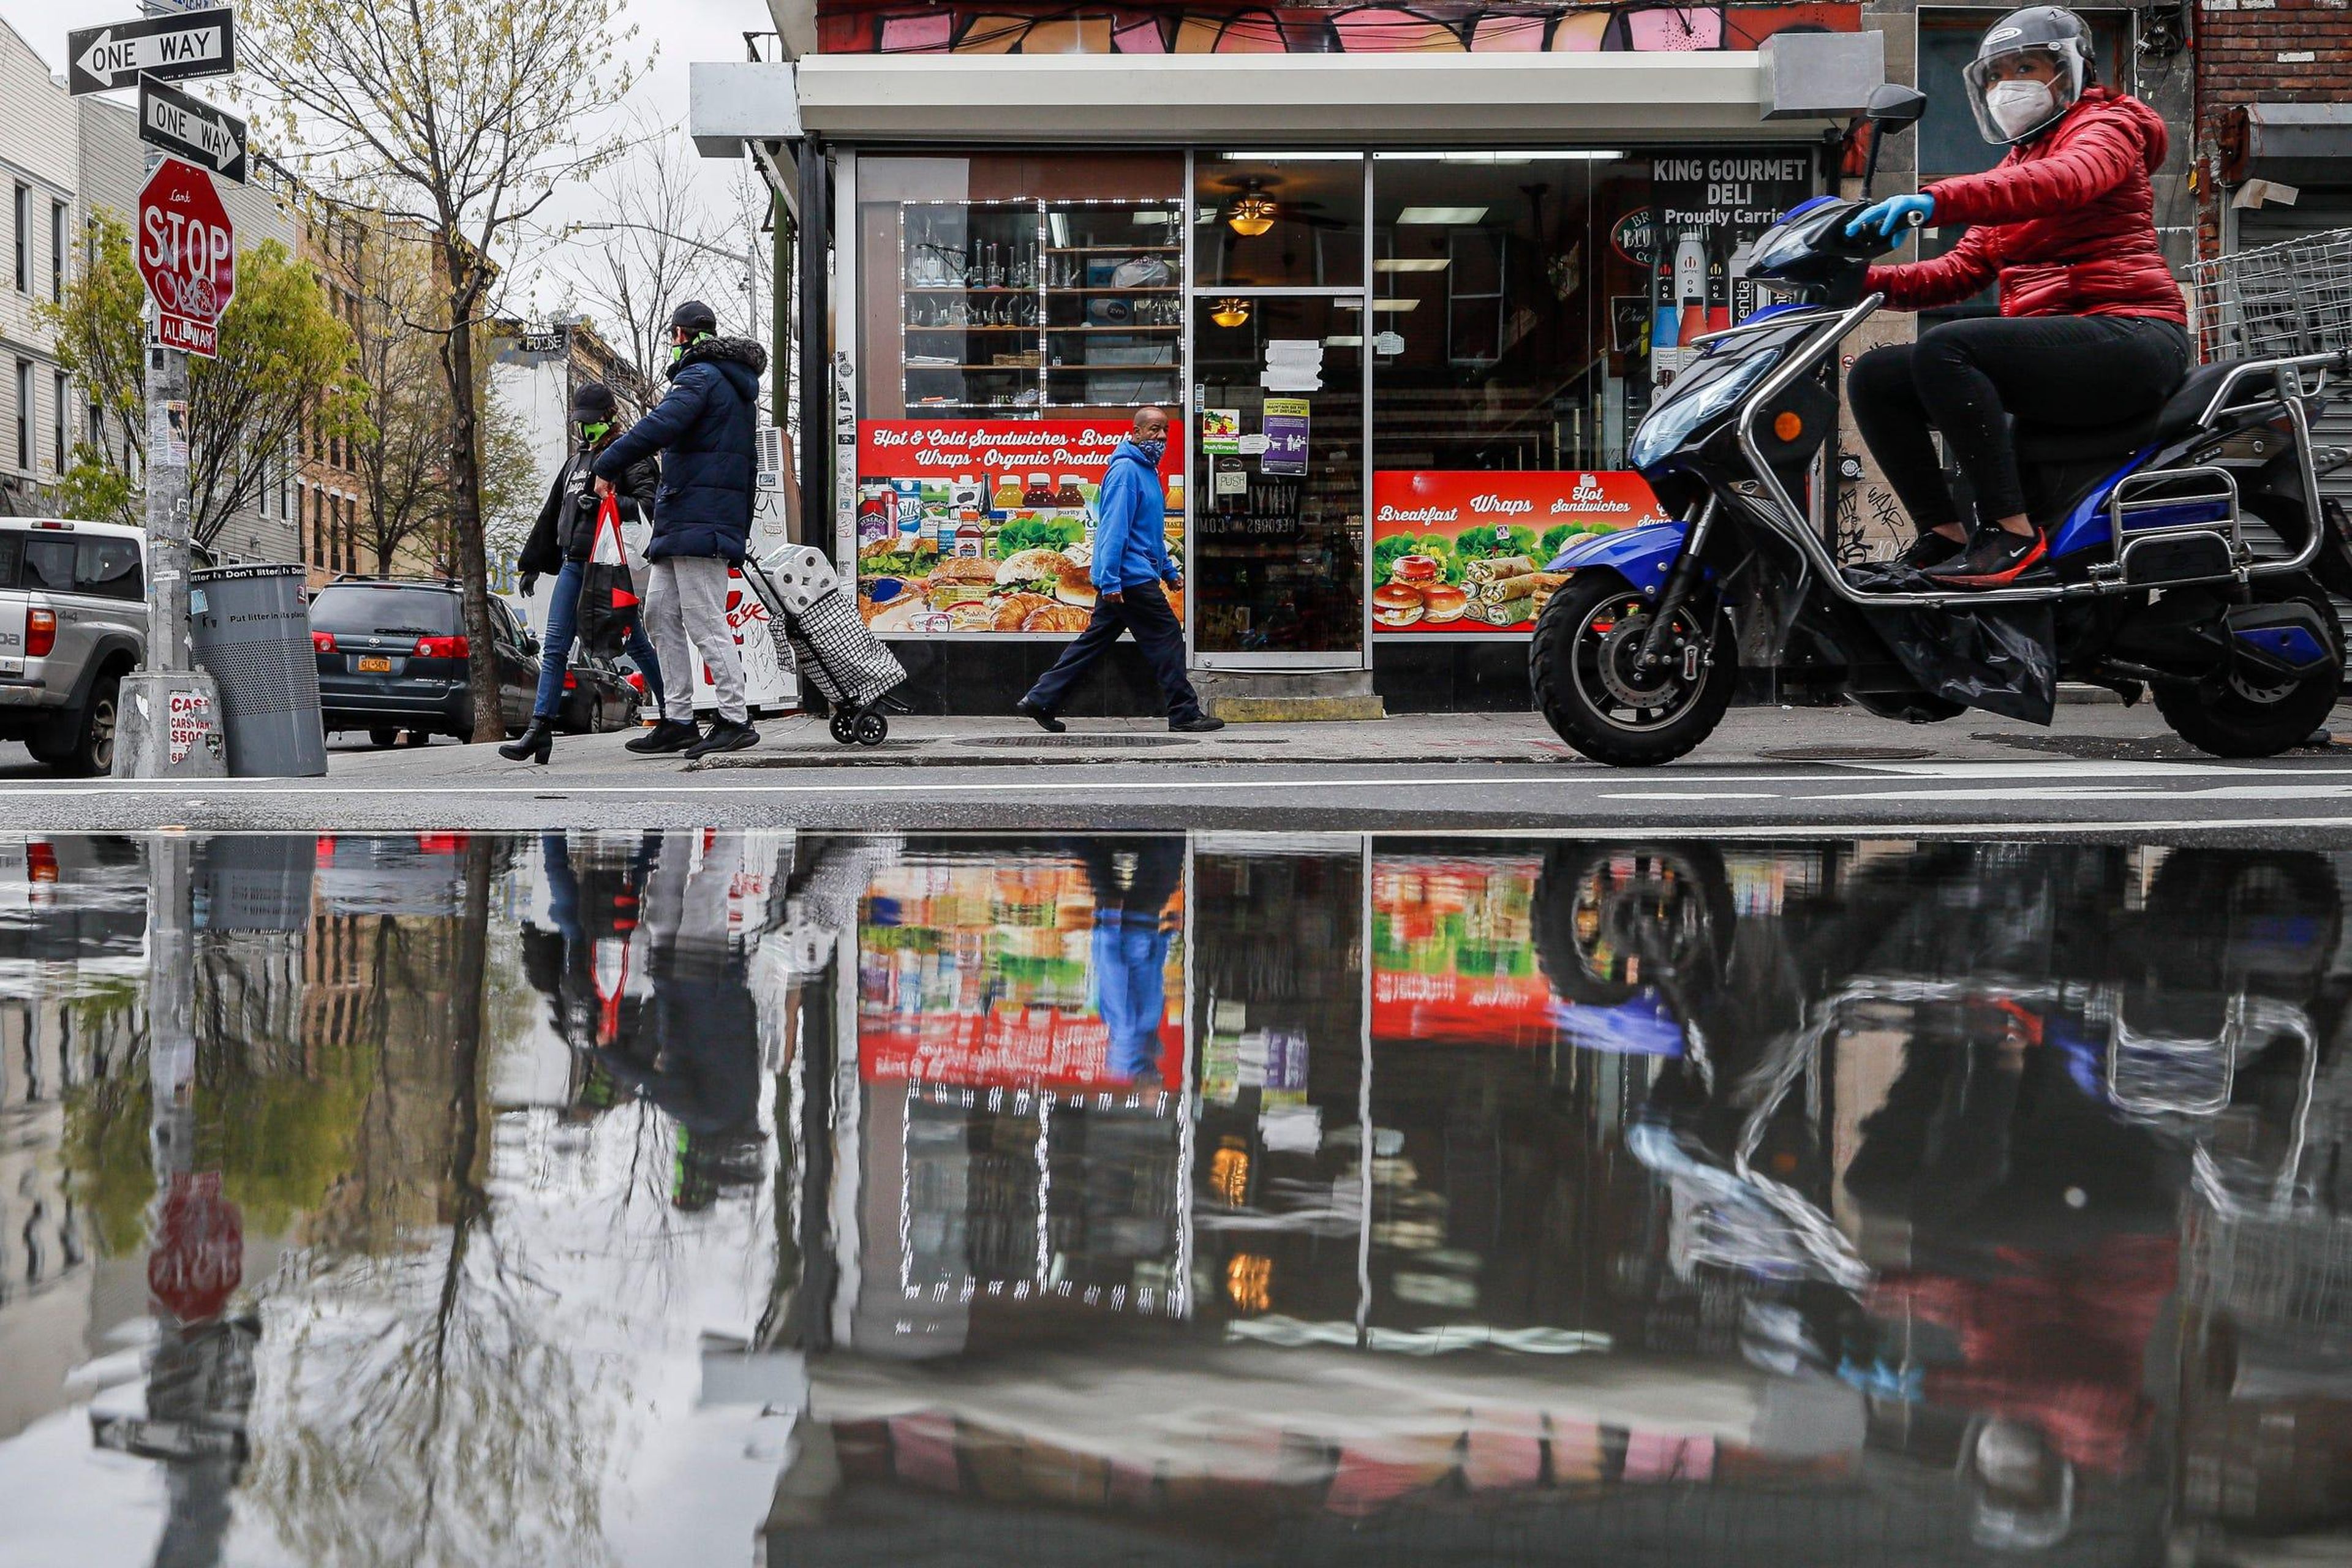 Pedestrians and motorists wear personal protective equipment as they pass a small grocery that is one of the few businesses open on the street in New York. (AP Photo/John Minchillo)